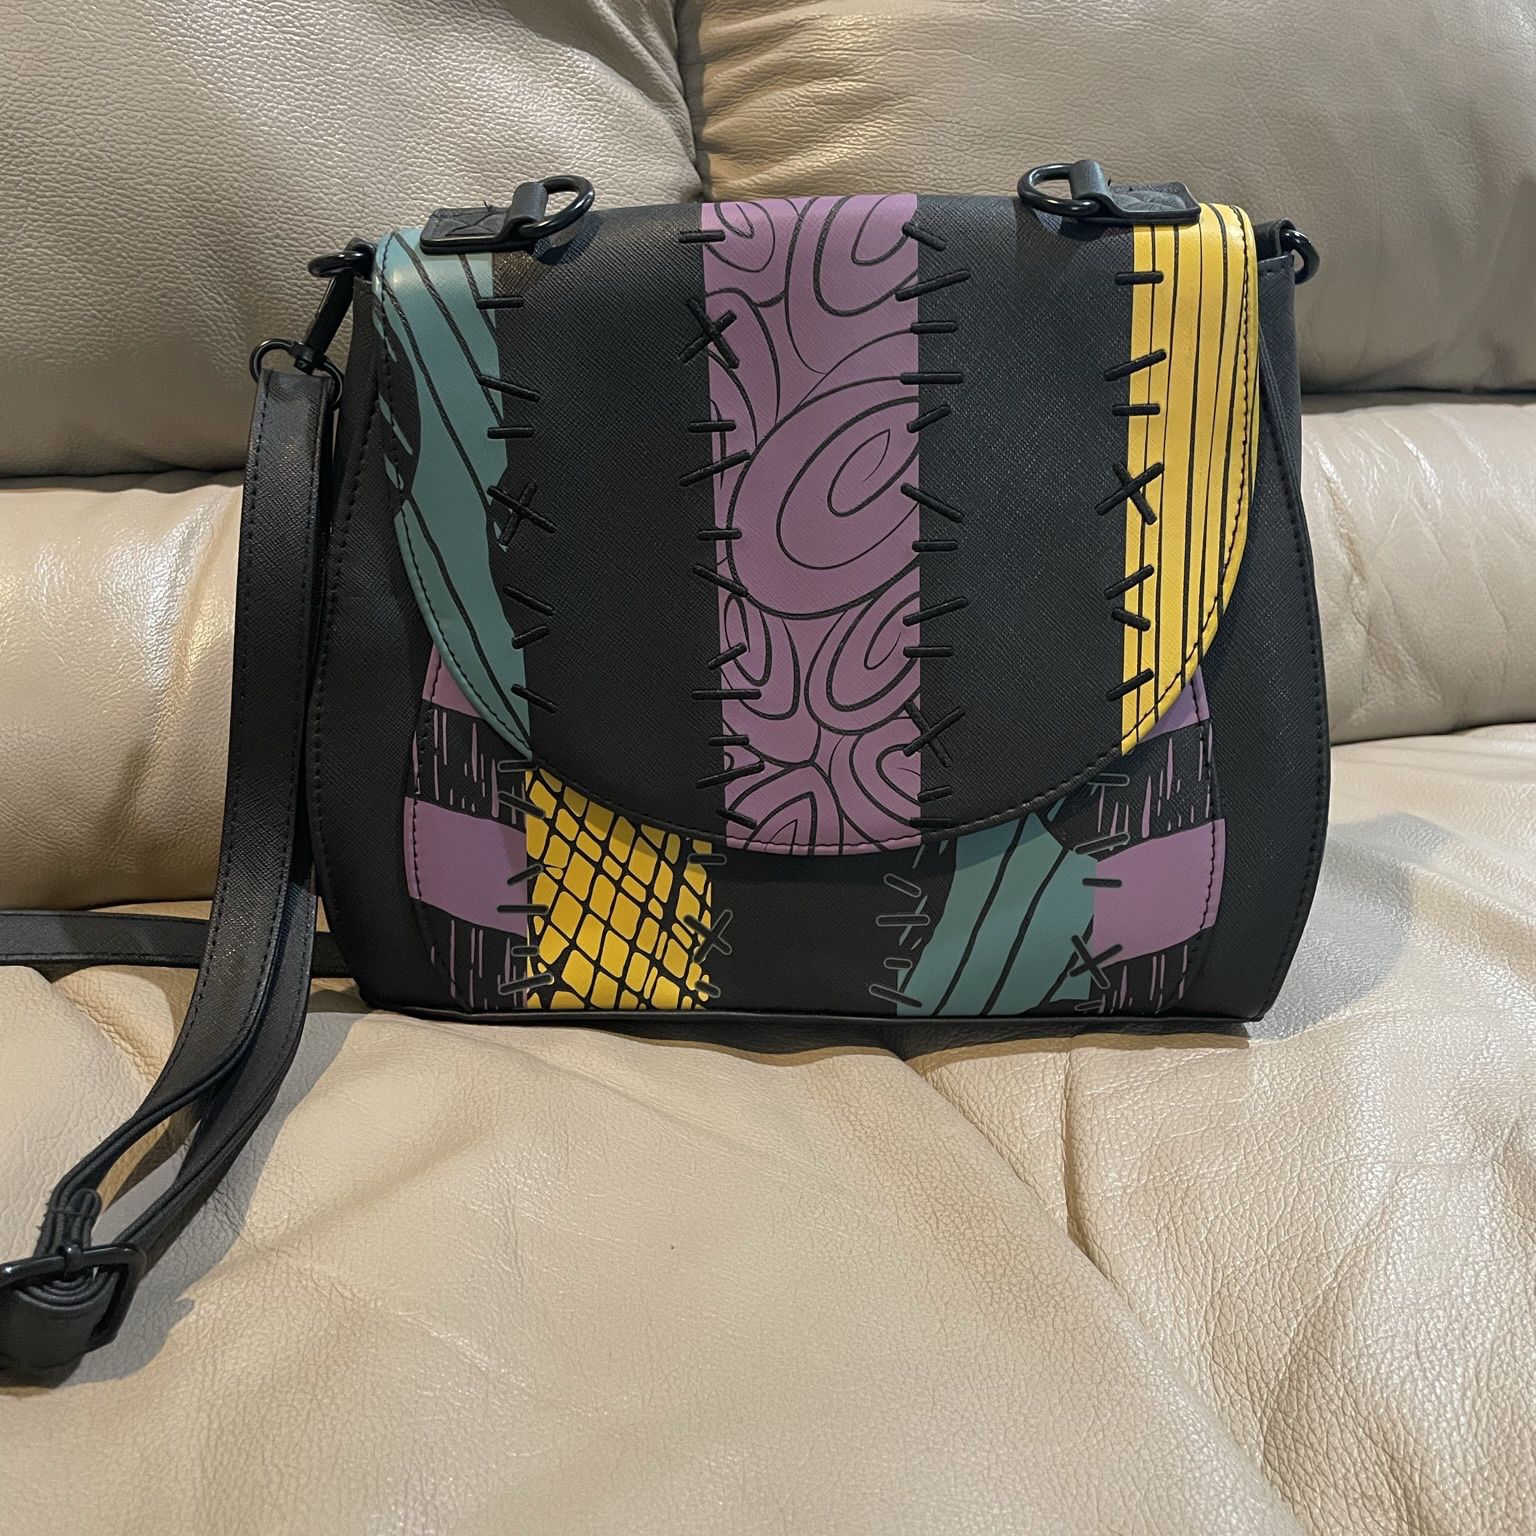 Loungefly Sleeping Beauty Purse for Sale in Chino, CA - OfferUp